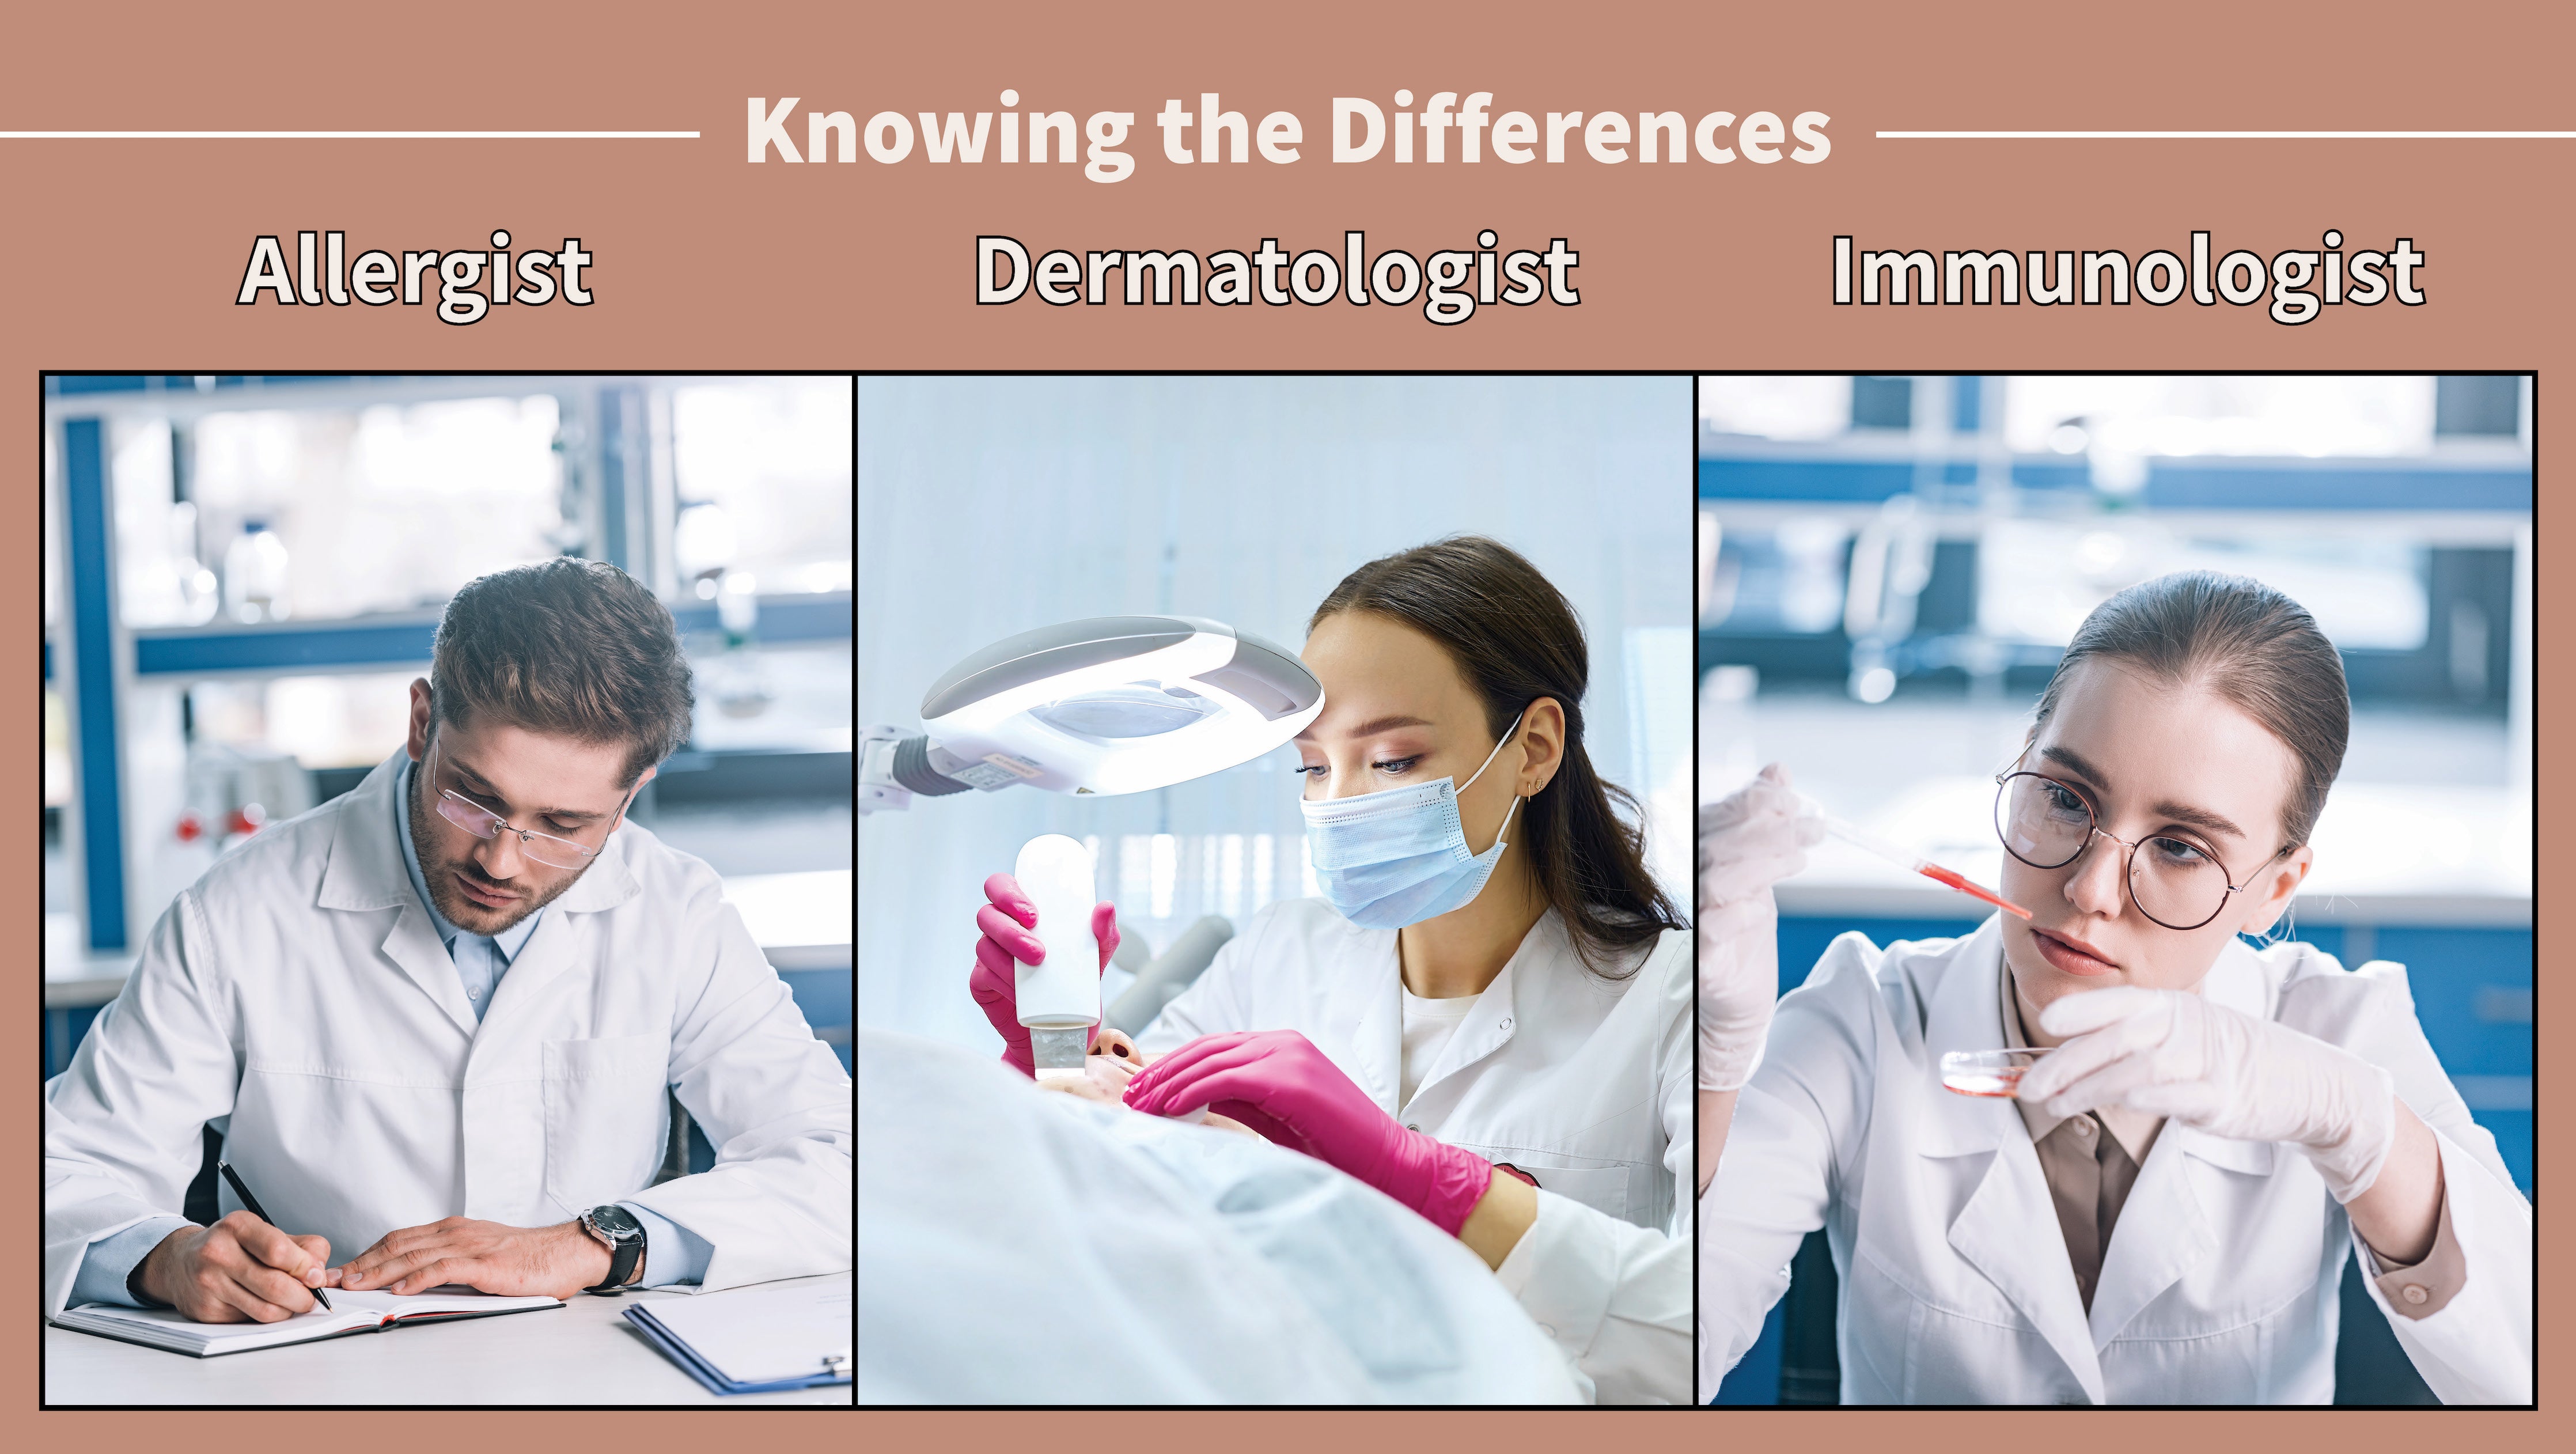 The Differences Between an Allergist, a Dermatologist, and an Immunologist